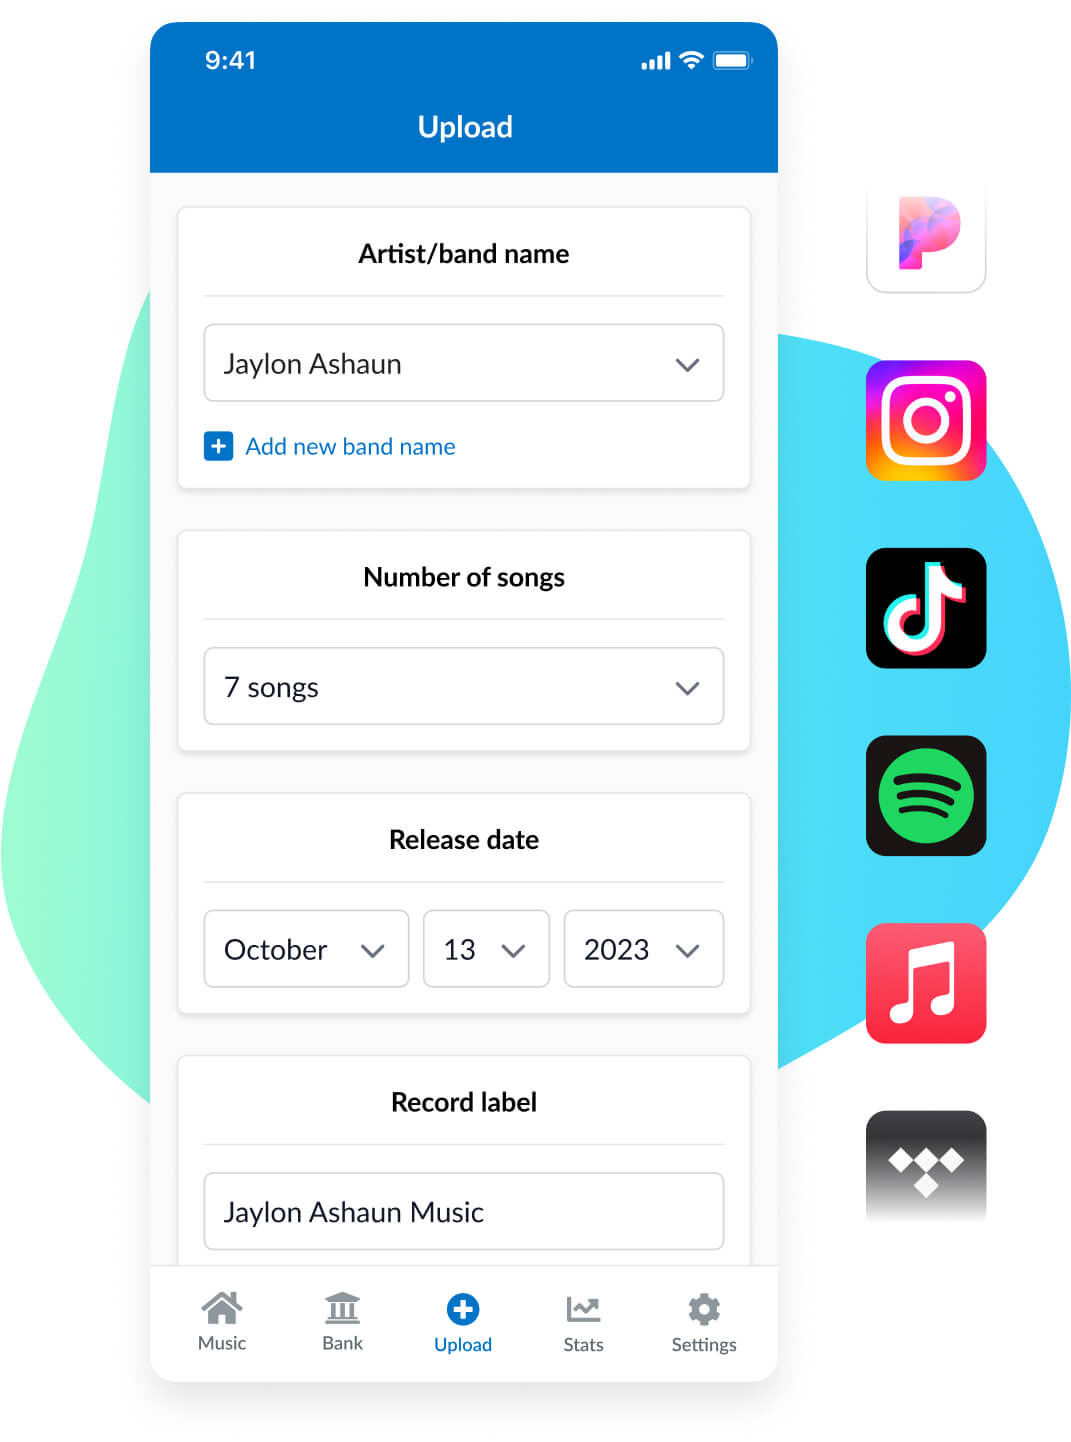 Example of the DistroKid iPhone app's upload form with a blue blob shape behind it. It also has a list of icons where your music will be distributed: Pandora, Instagram, TikTok, Spotify, Apple Music, and Spotify